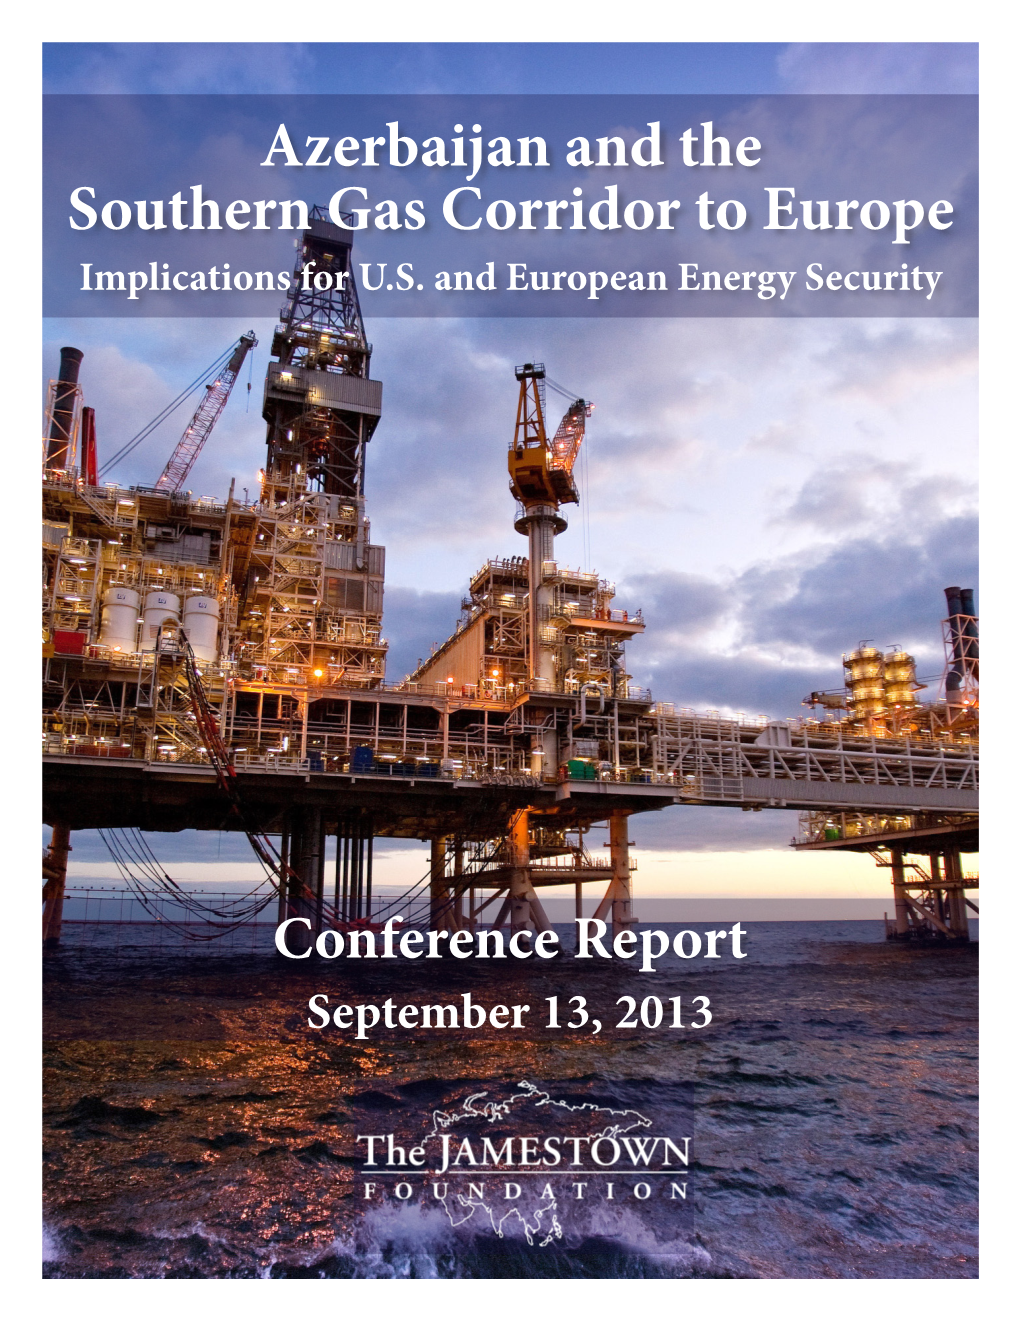 Azerbaijan and the Southern Gas Corridor to Europe Implications for U.S